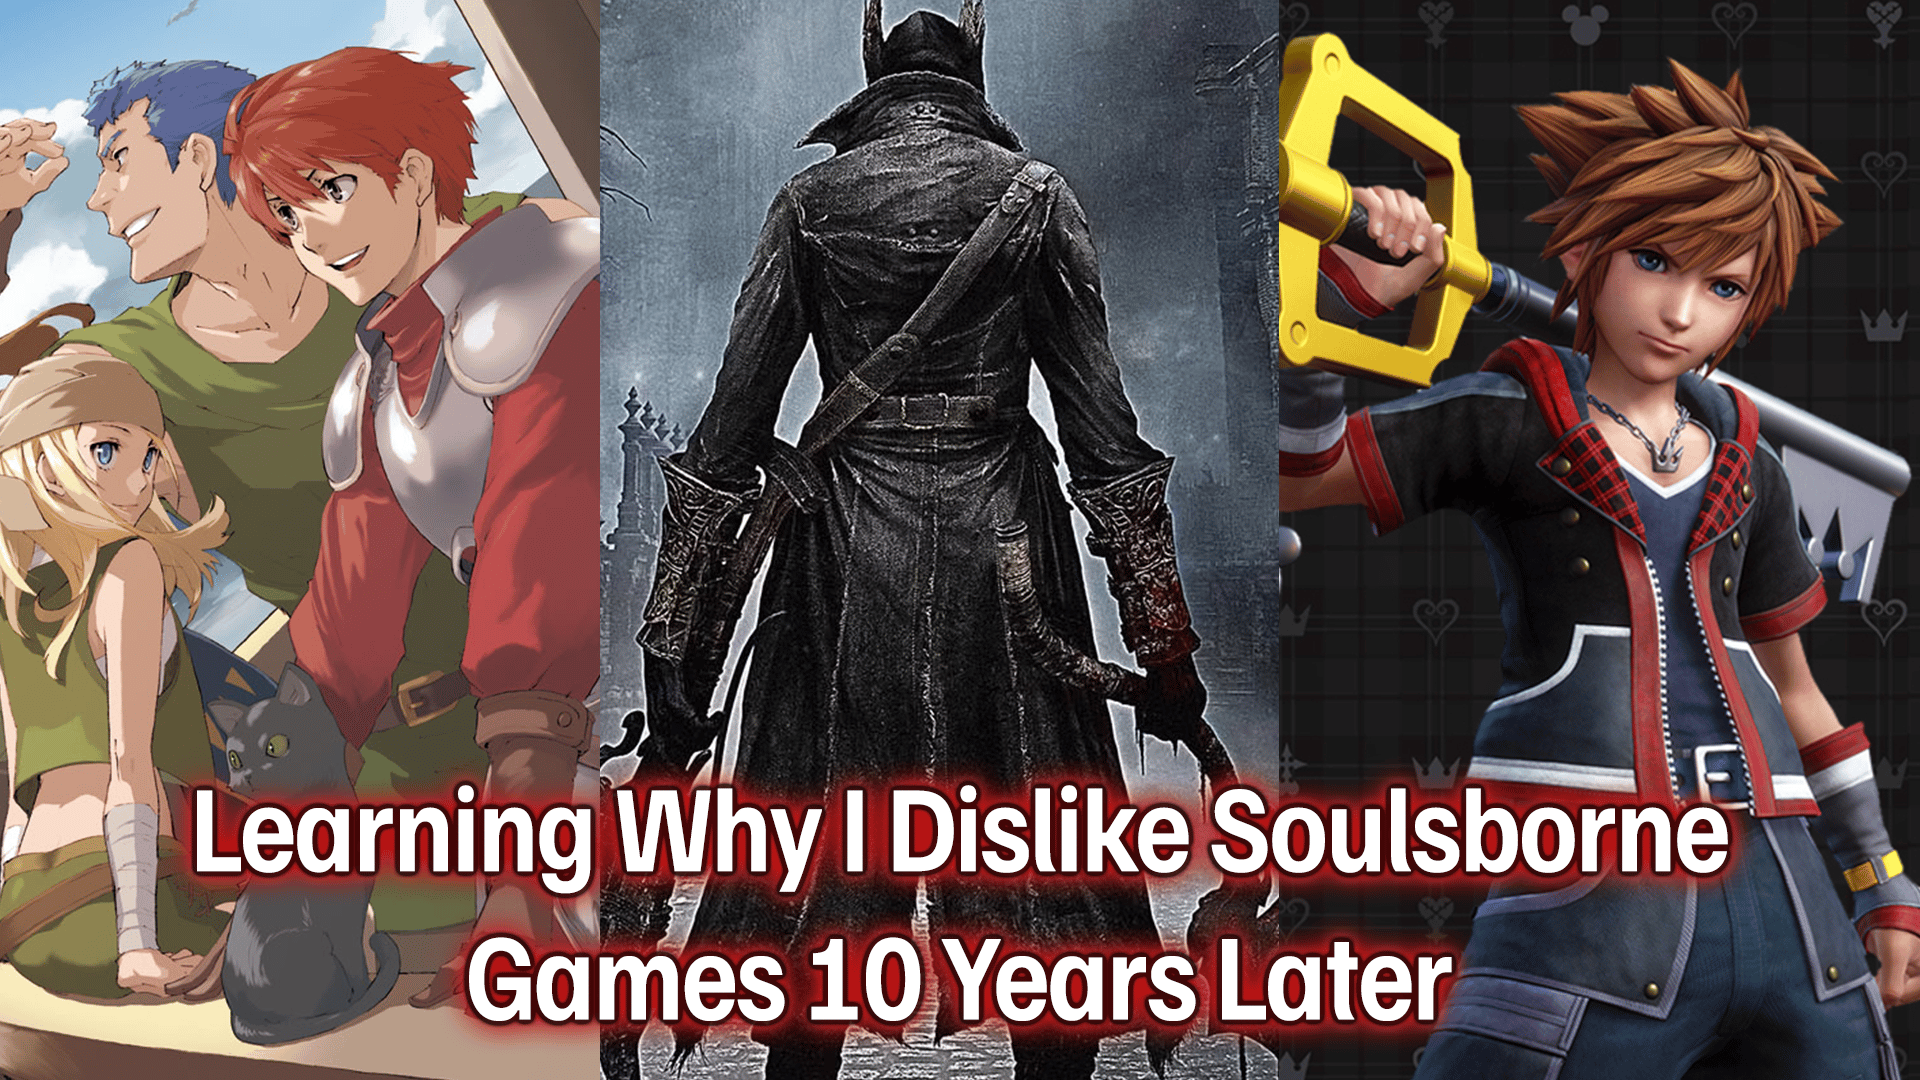 Learning Why I Dislike Soulsborne Games After 10 Years